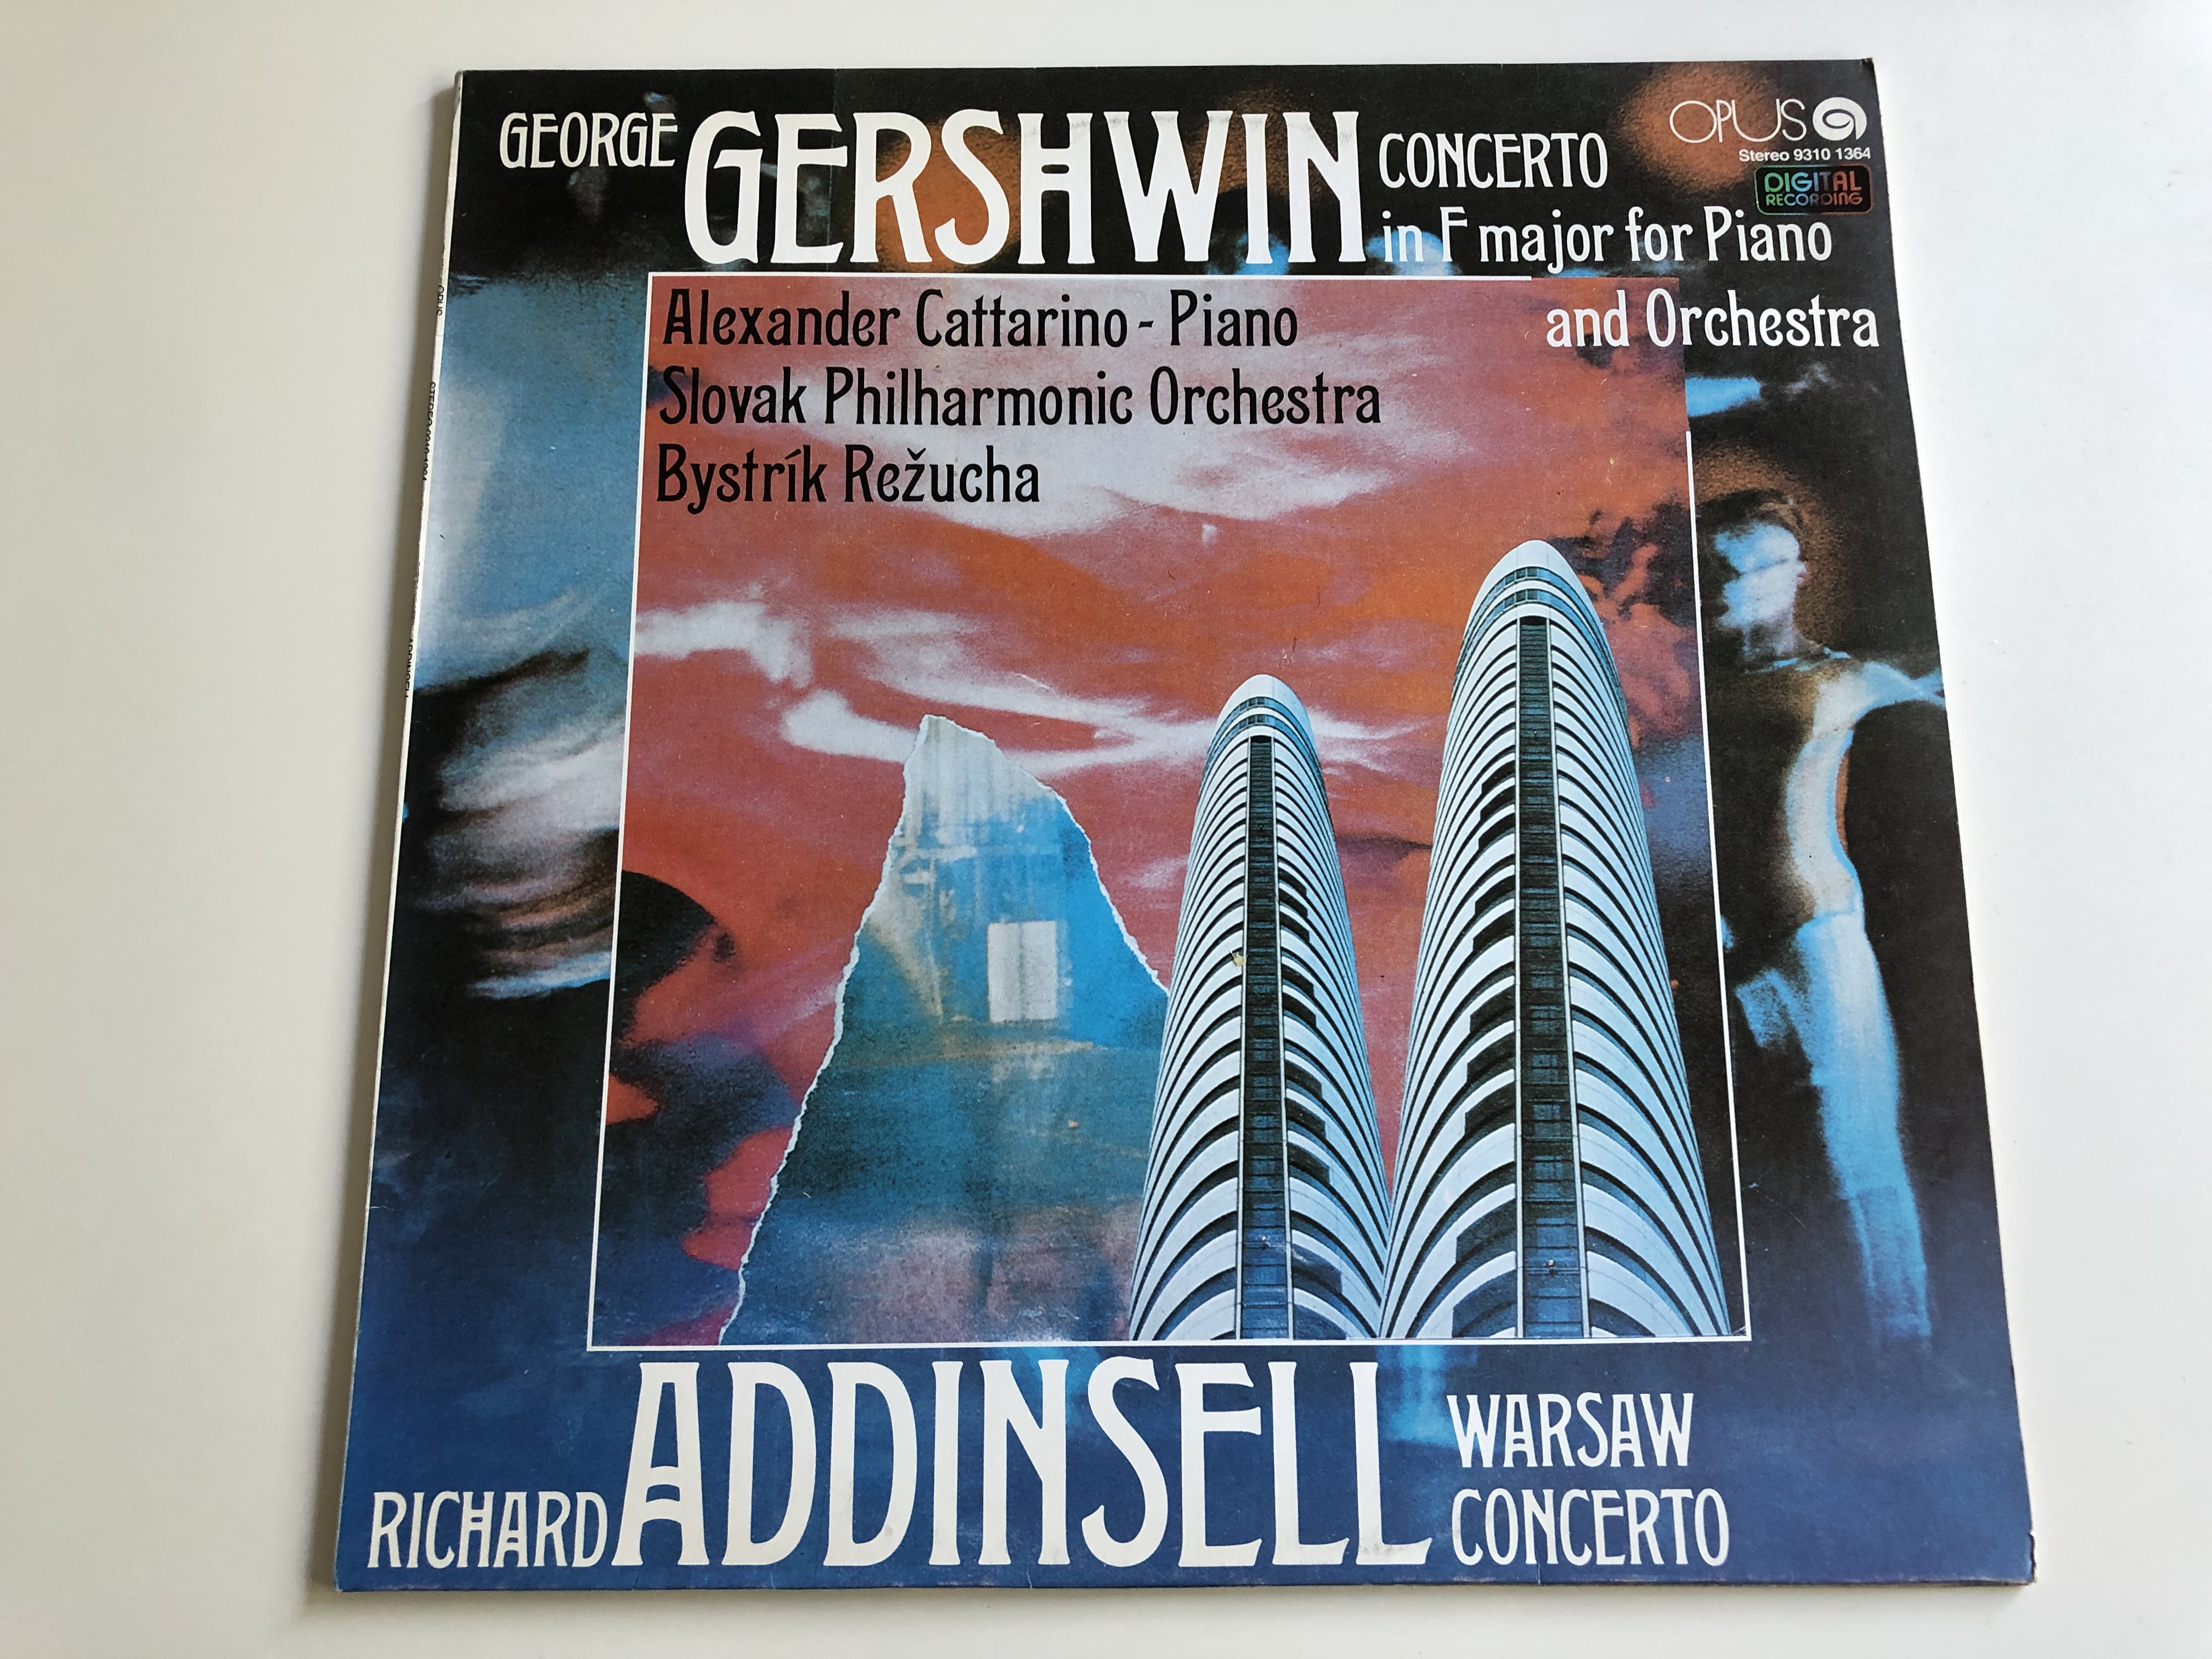 george-gershwin-concerto-in-f-major-for-piano-and-orchestra-alexander-cattarino-slovak-philharmonic-orchestra-bystrik-re-ucha-richard-addinsell-warsaw-concerto-opus-lp-1-.jpg